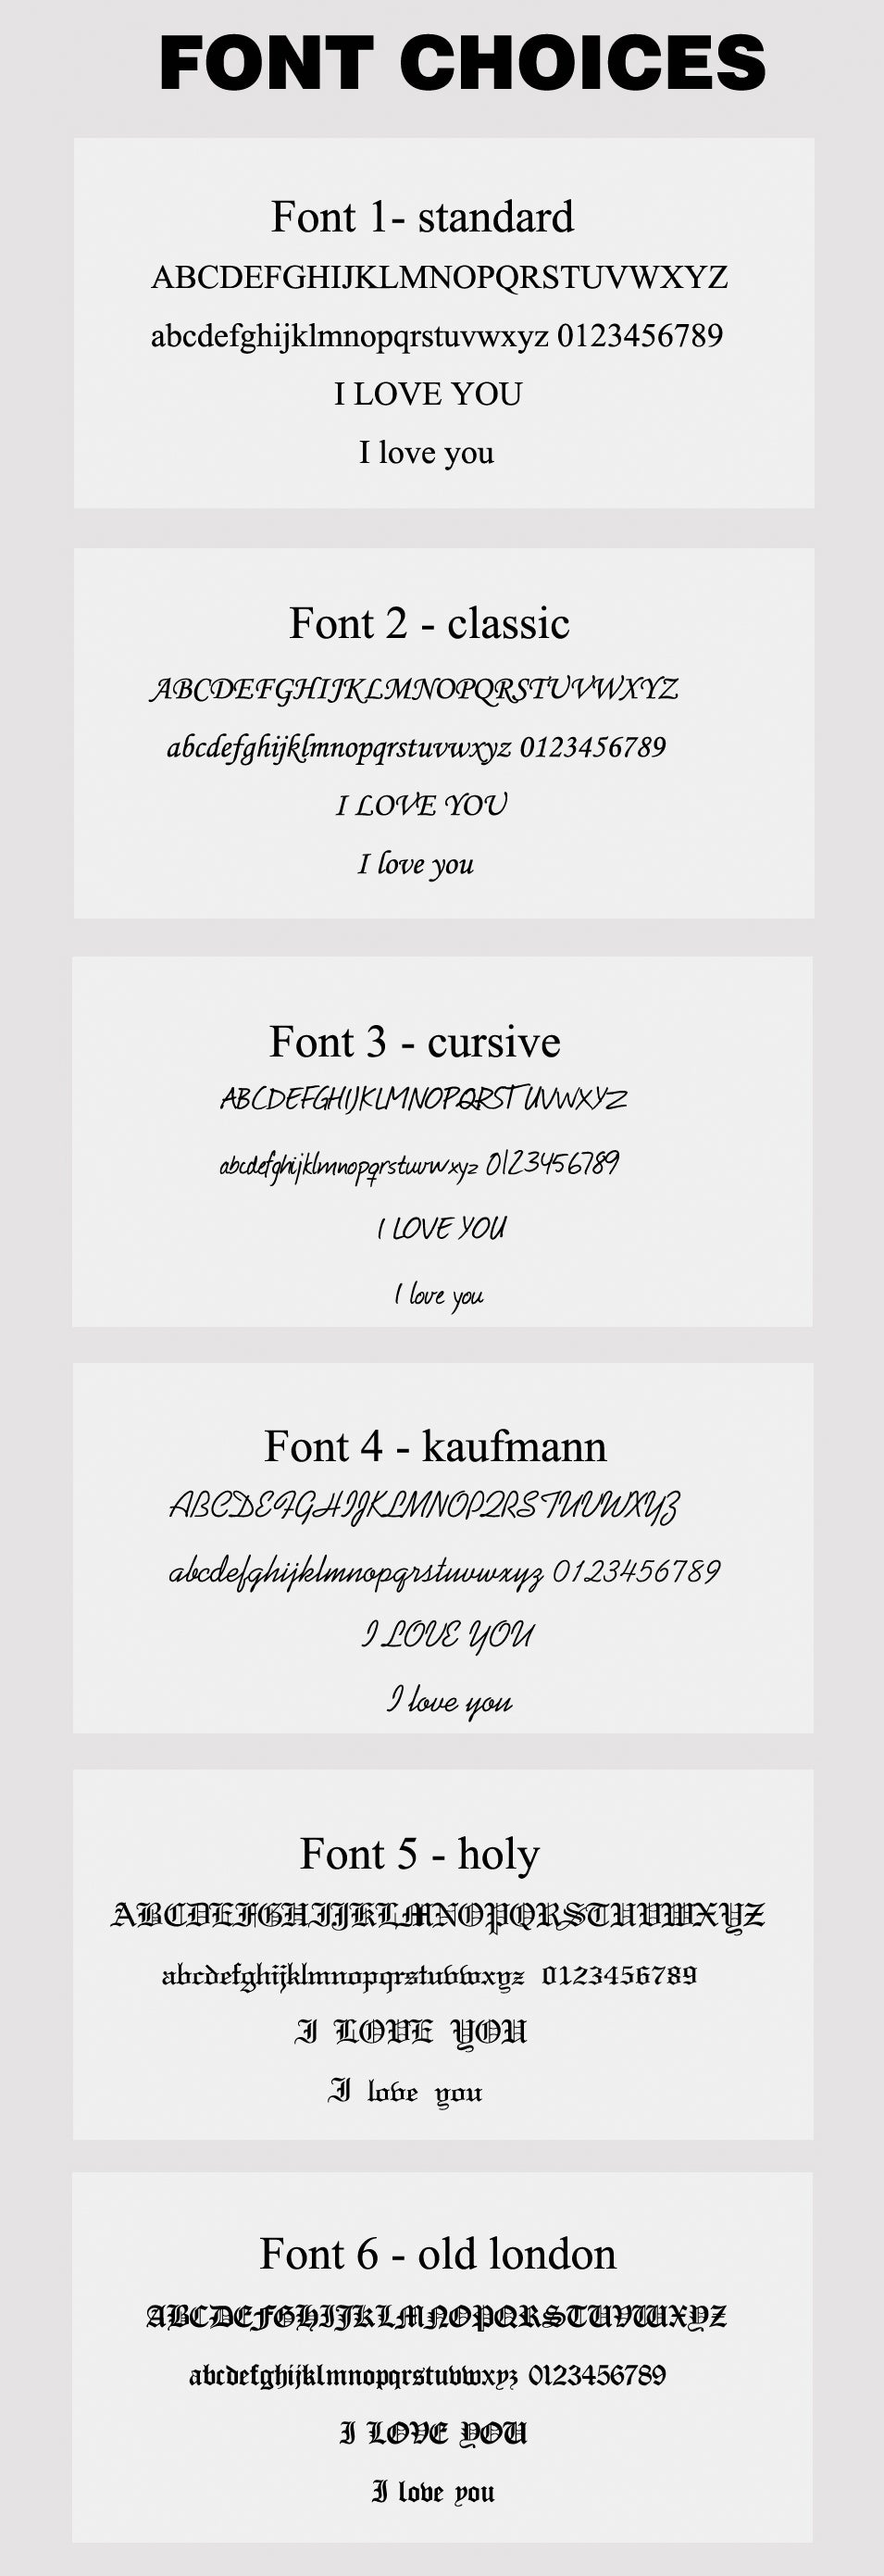 TimJeweler font choices cad985fe f8f5 4a35 9905